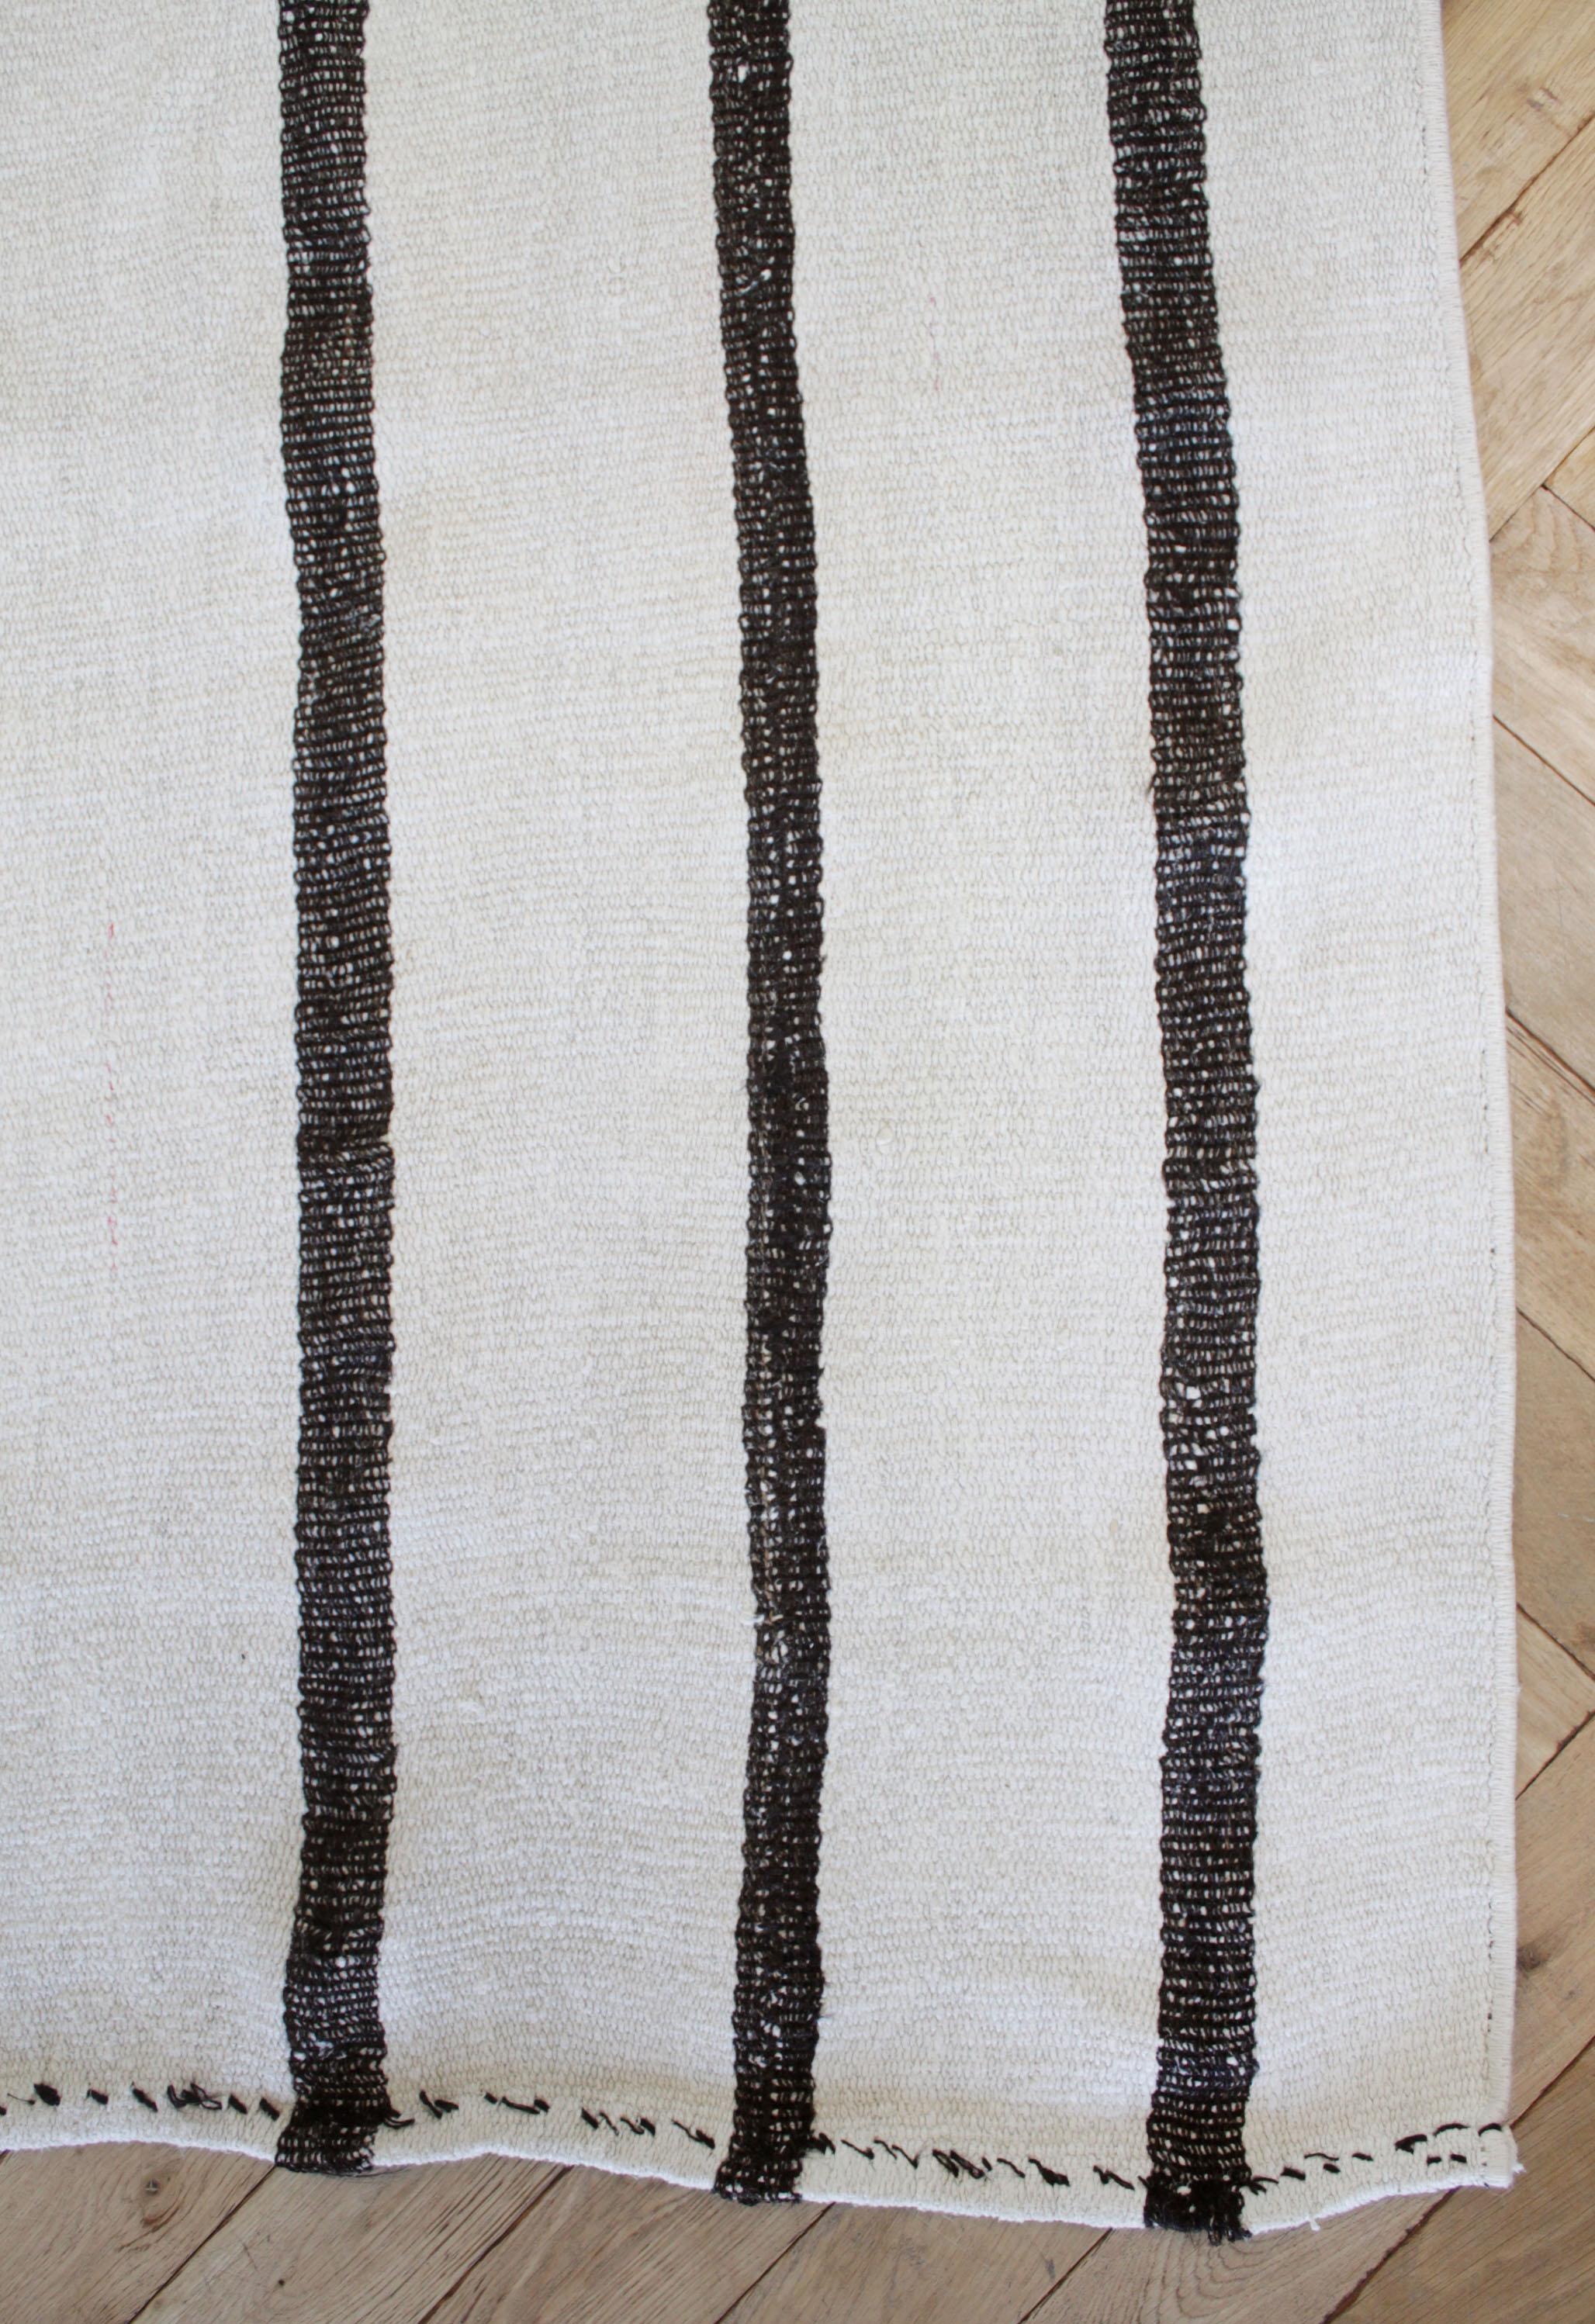 Otto rug
Vintage Turkish rug in brown with white weave and creamy white stripes, with dark brown stripes.
Flat-weave, wool and goat hair, make these extremely durable with great use for high traffic areas. This item has been cleaned, and is ready